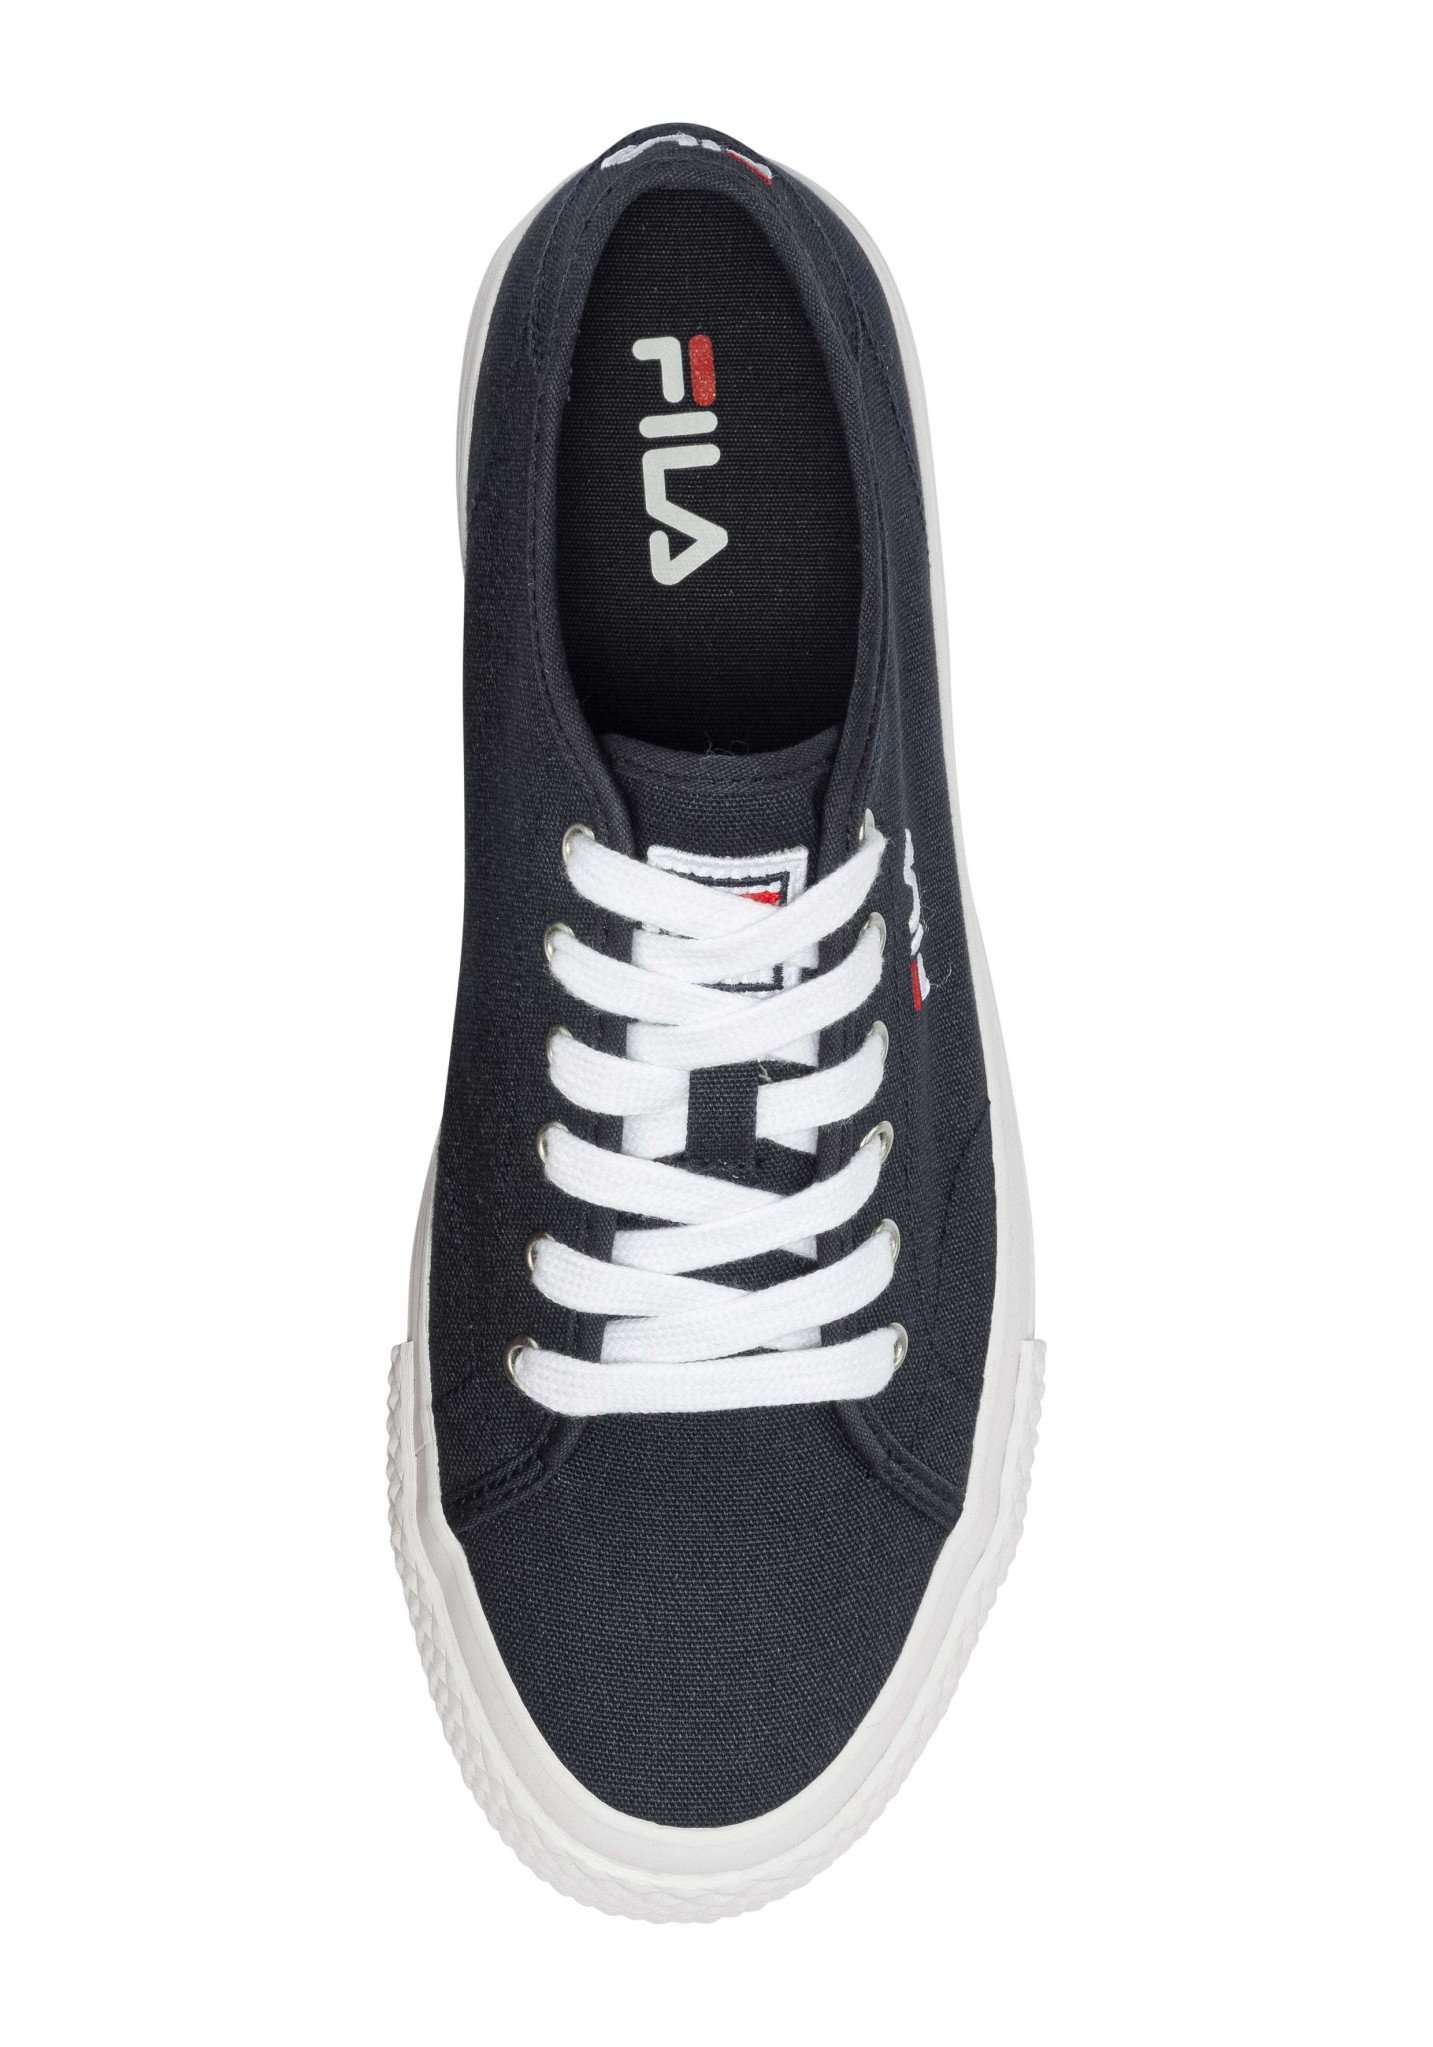 Pointer Classic Wmn Navy Sneakers Fila   